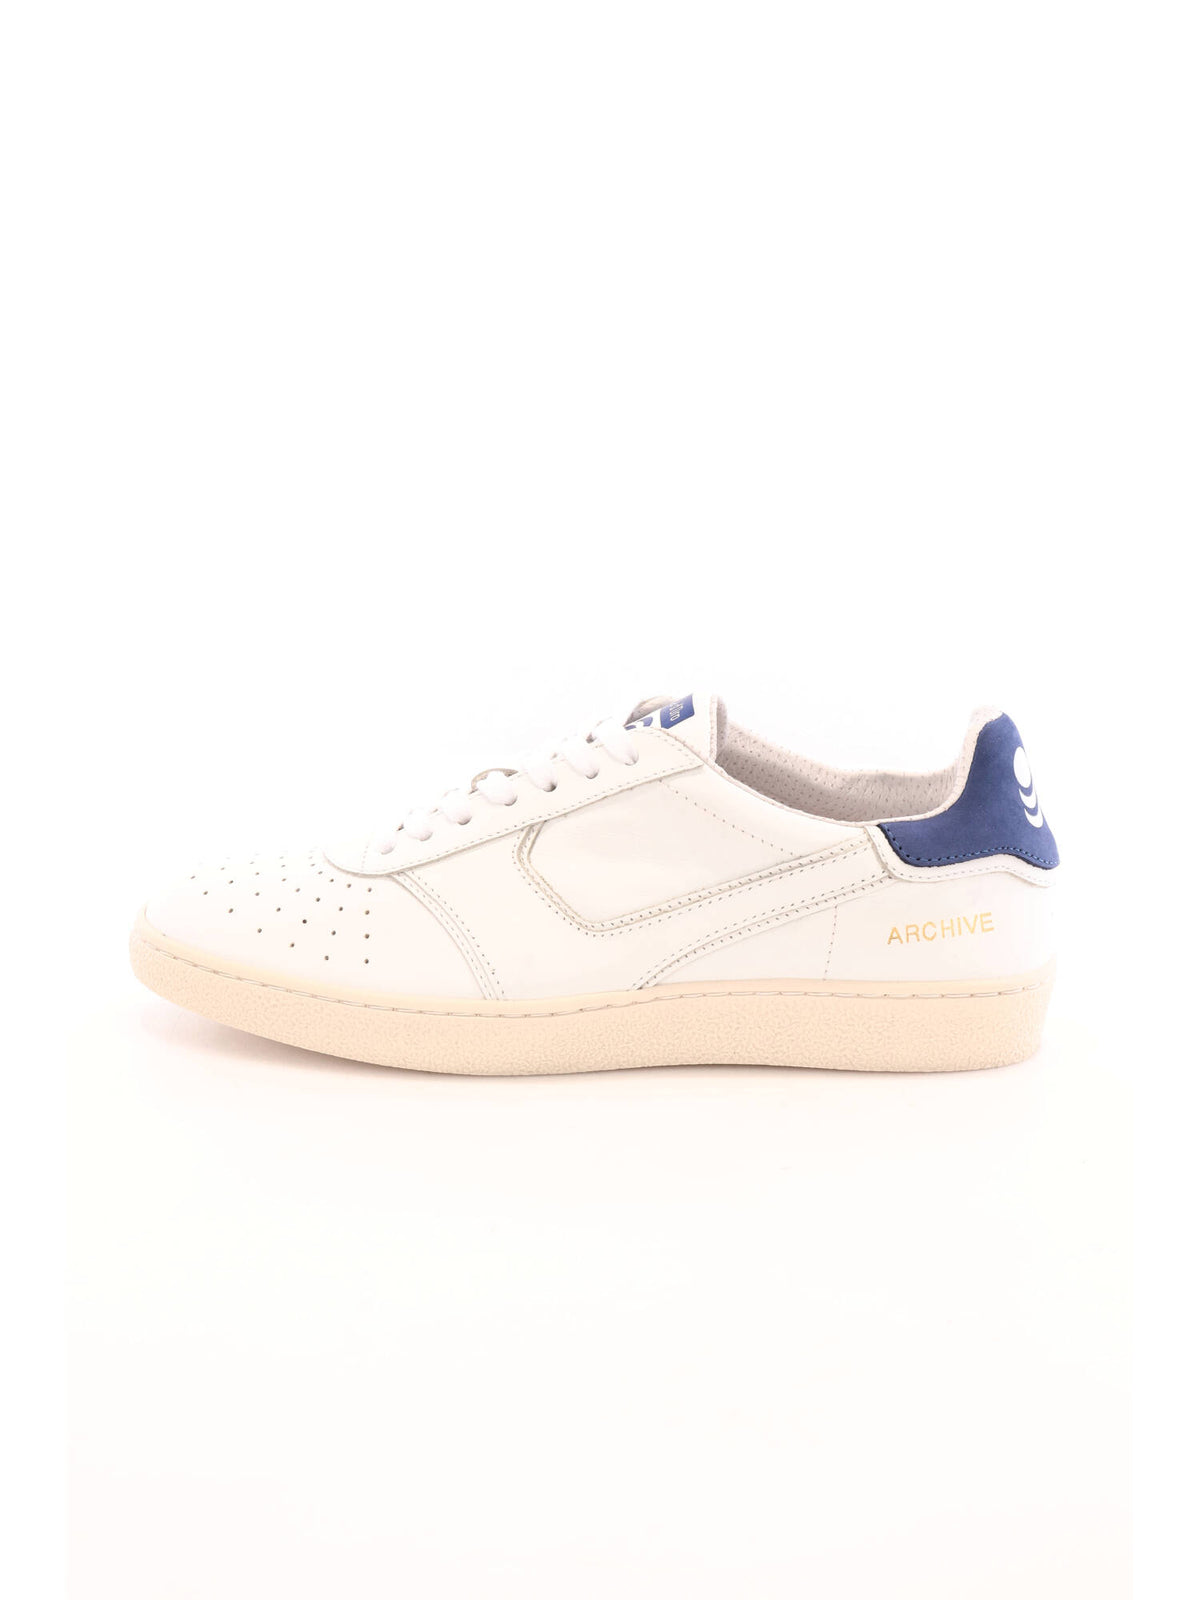 PANTOFOLA D'ORO SNEAKERS ARCHIVE COLORE BIANCO & ROYAL